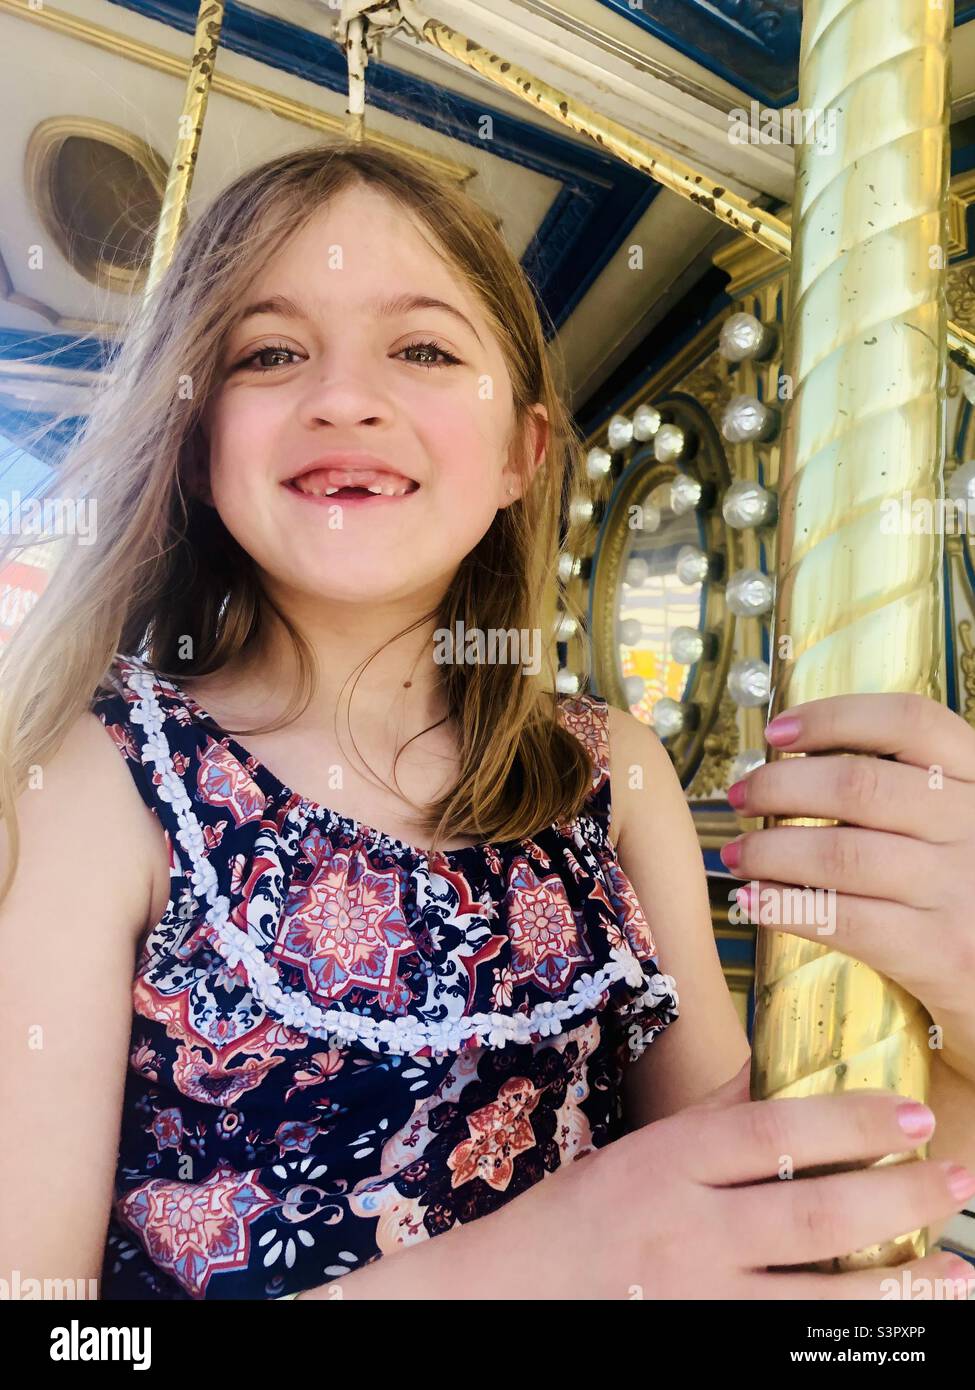 Young girl riding a merry go round Stock Photo